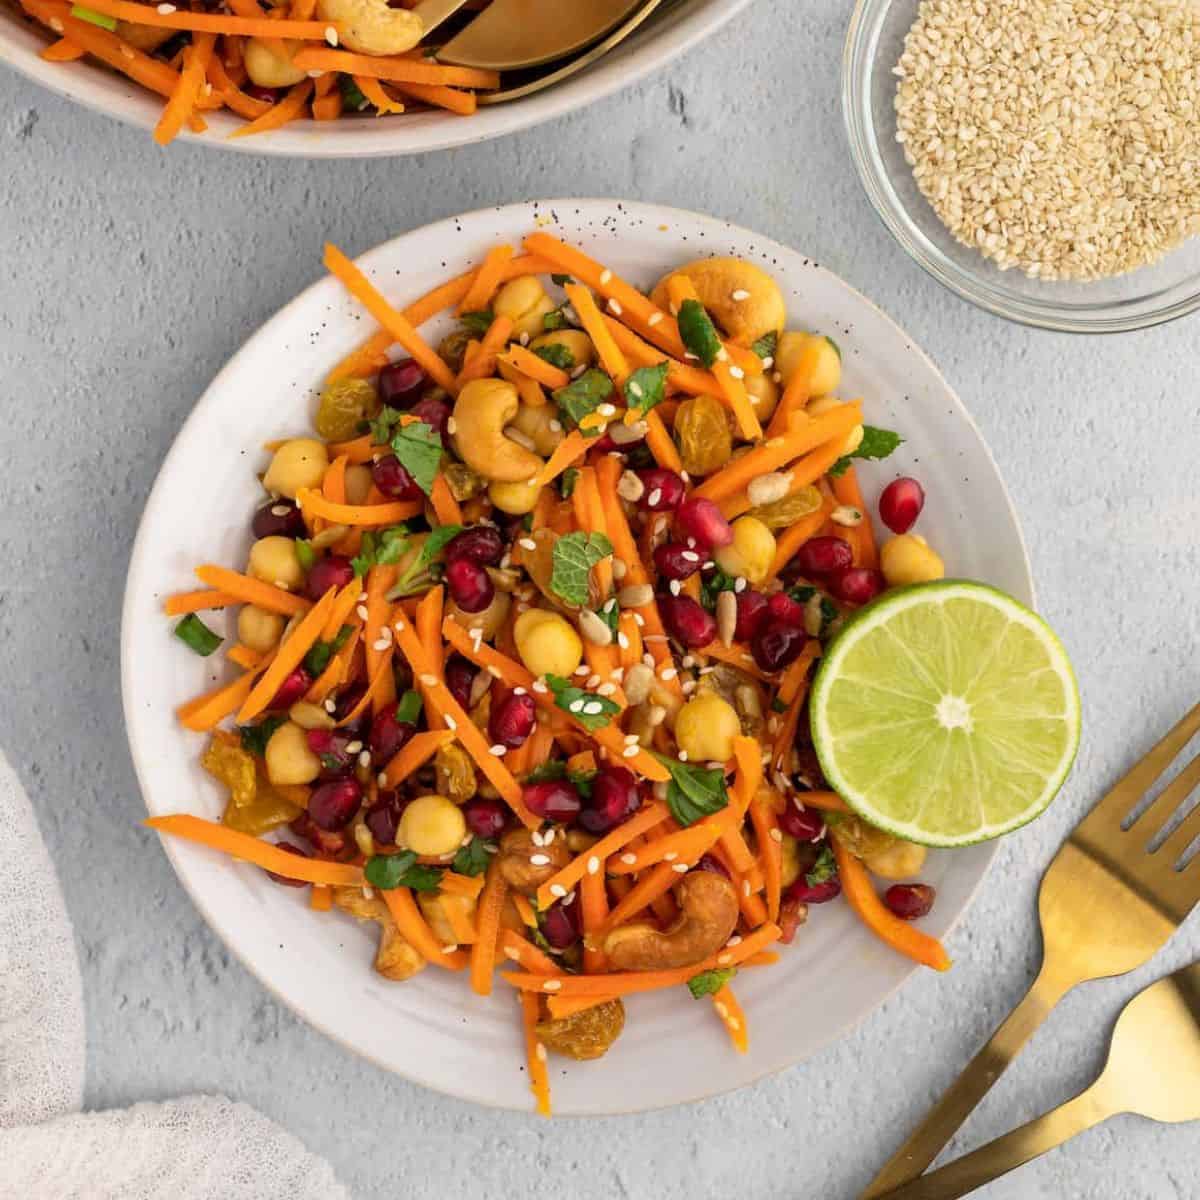 A plate of Moroccan carrot salad.